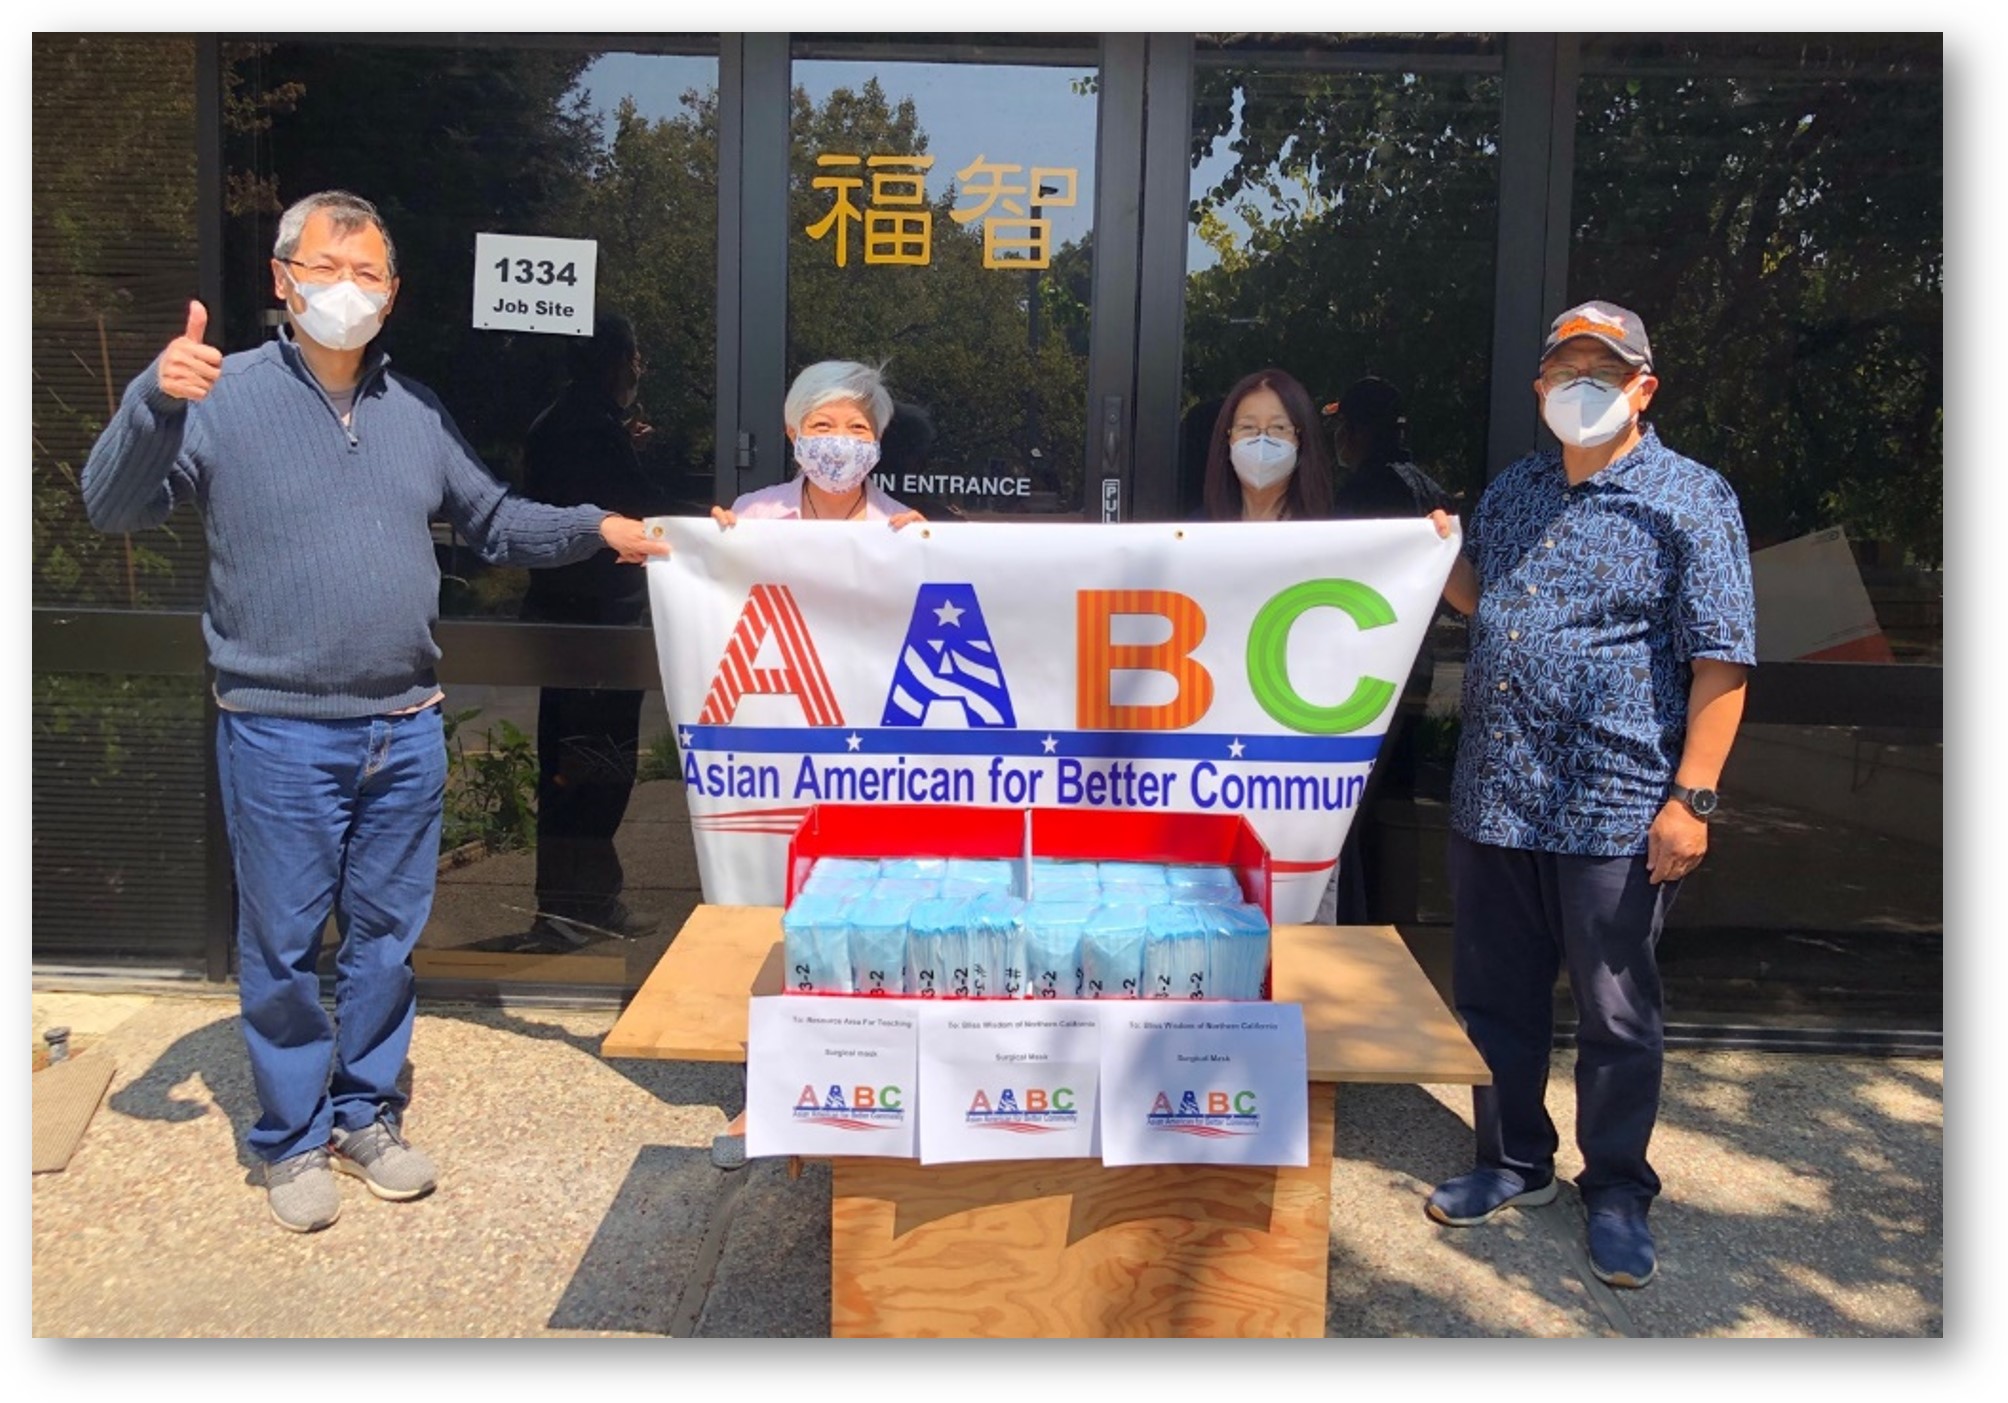 08/26/2020 AABC donated 1,000 masks to Blissed Wisdom Foundation